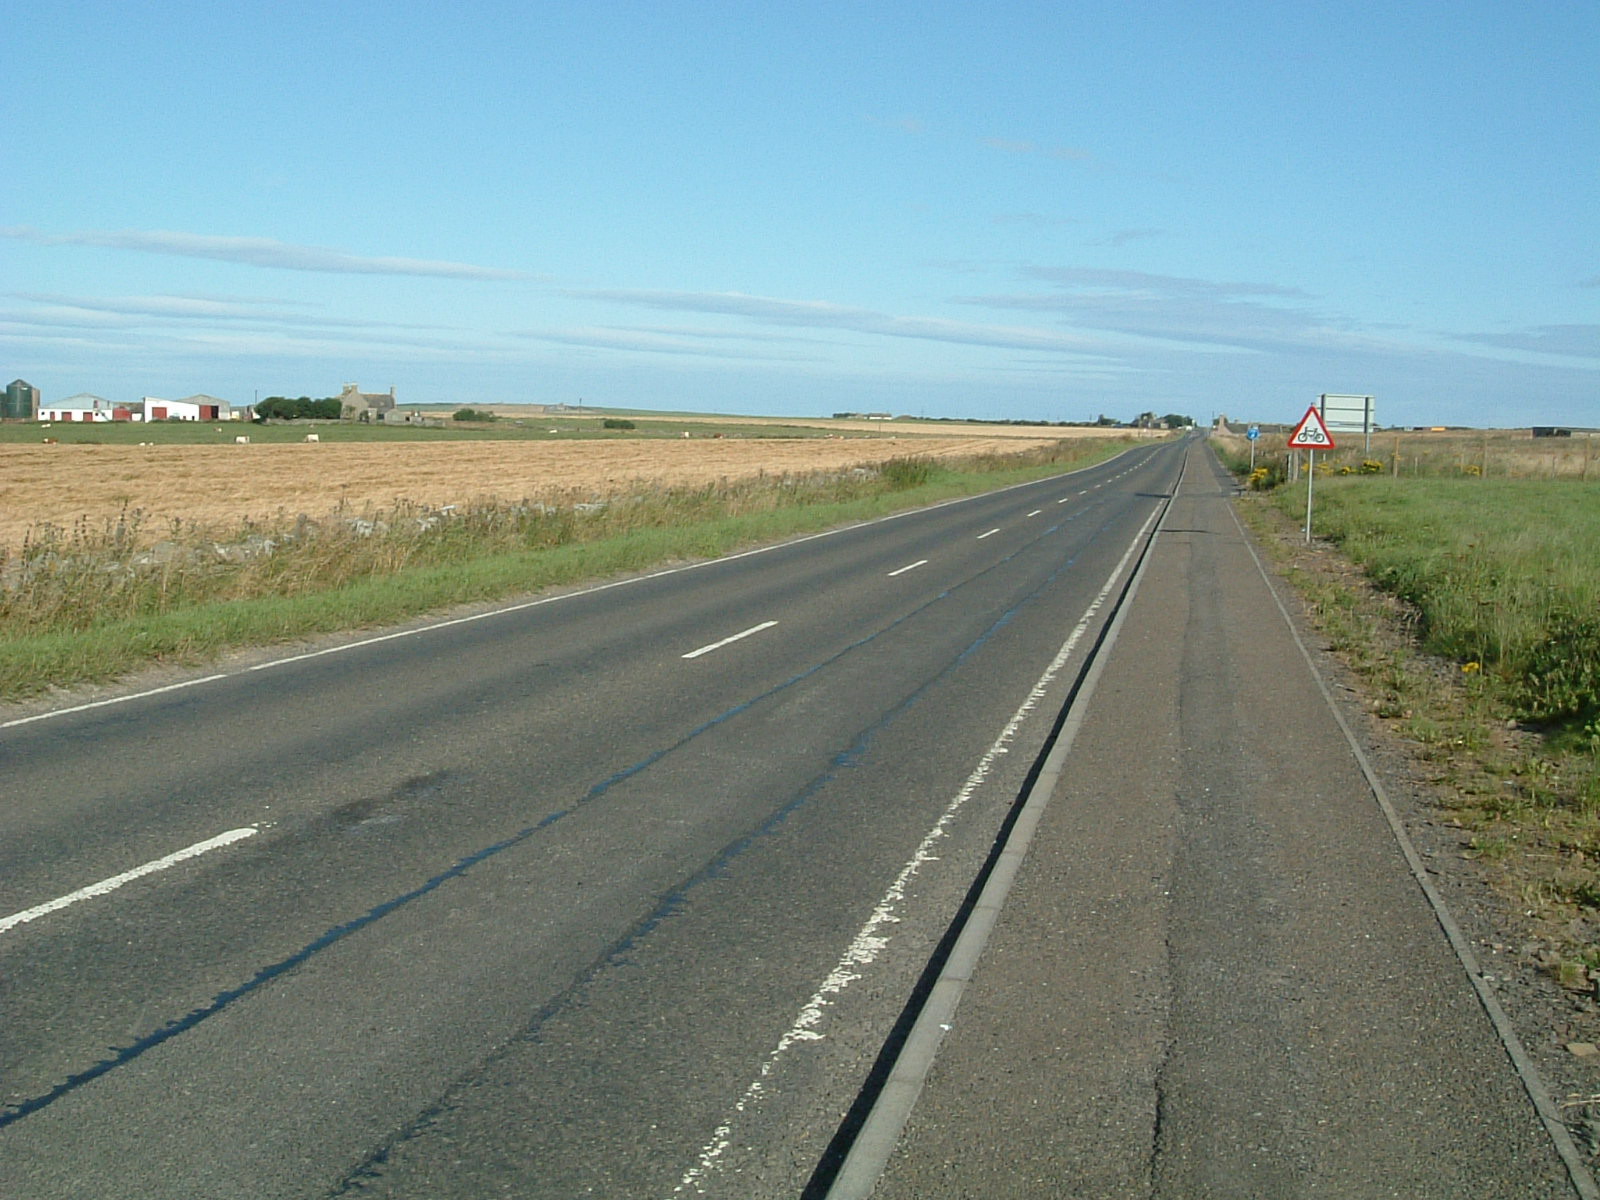 The A99